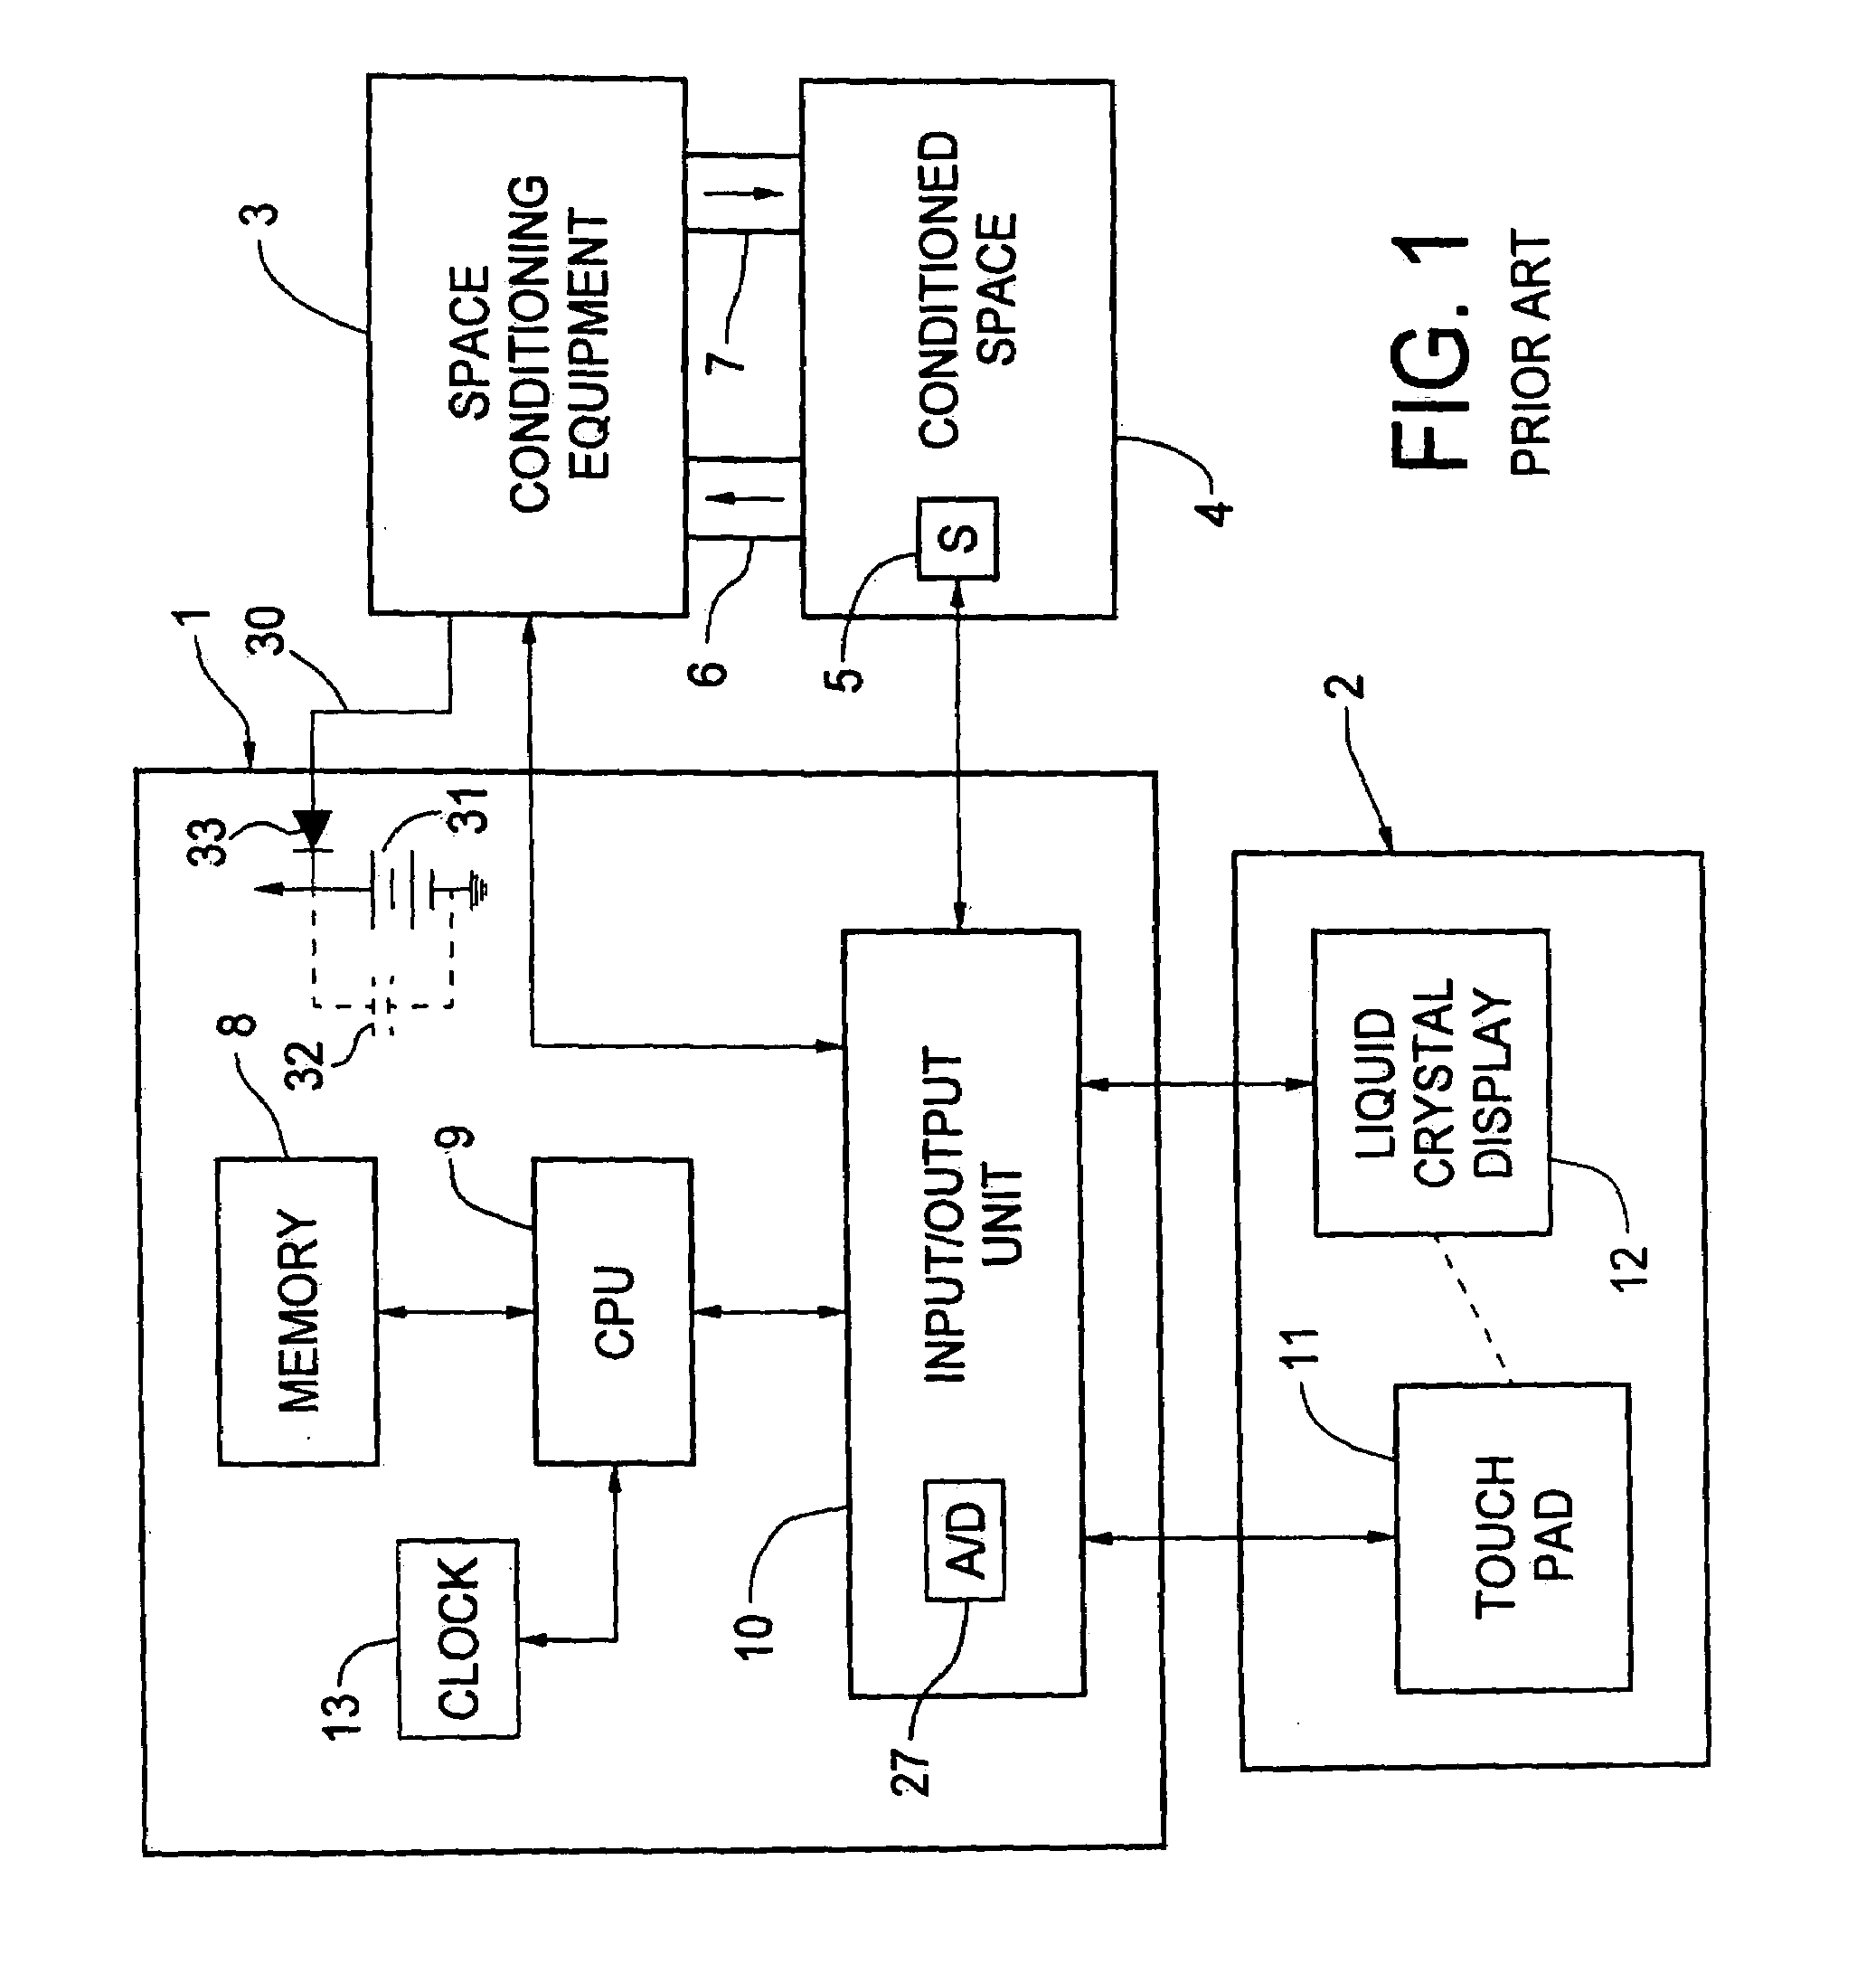 Programmable thermostat employing a fail safe real time clock